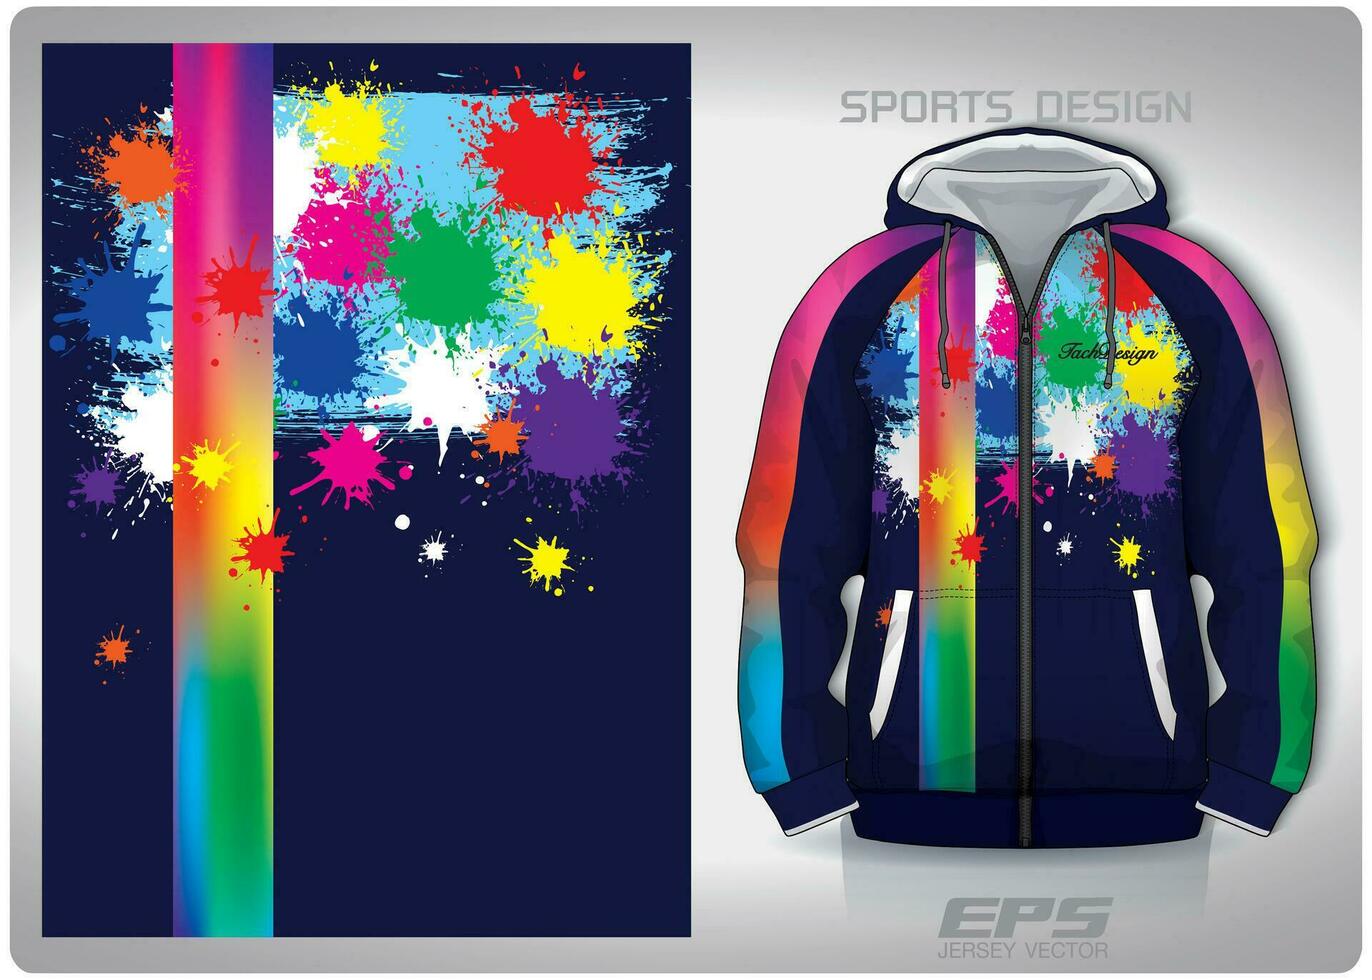 Vector sports shirt background image.Rainbow Salad Art pattern design, illustration, textile background for sports long sleeve hoodie, jersey hoodie